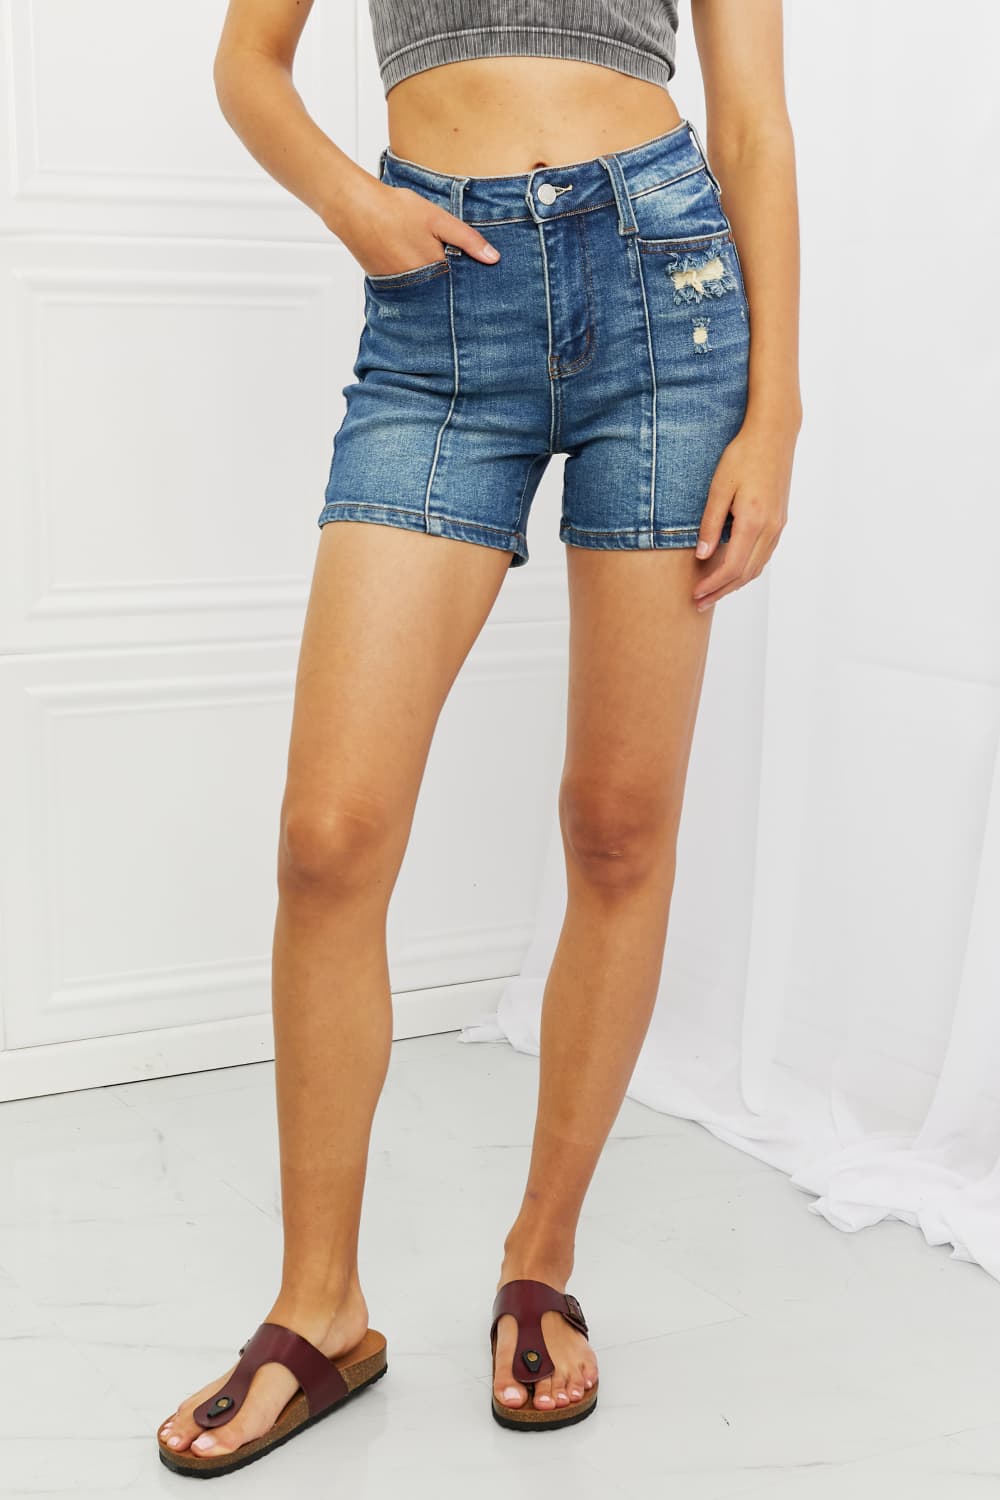 Judy Blue High Waist Seaming Detailed Shorts Style 150211